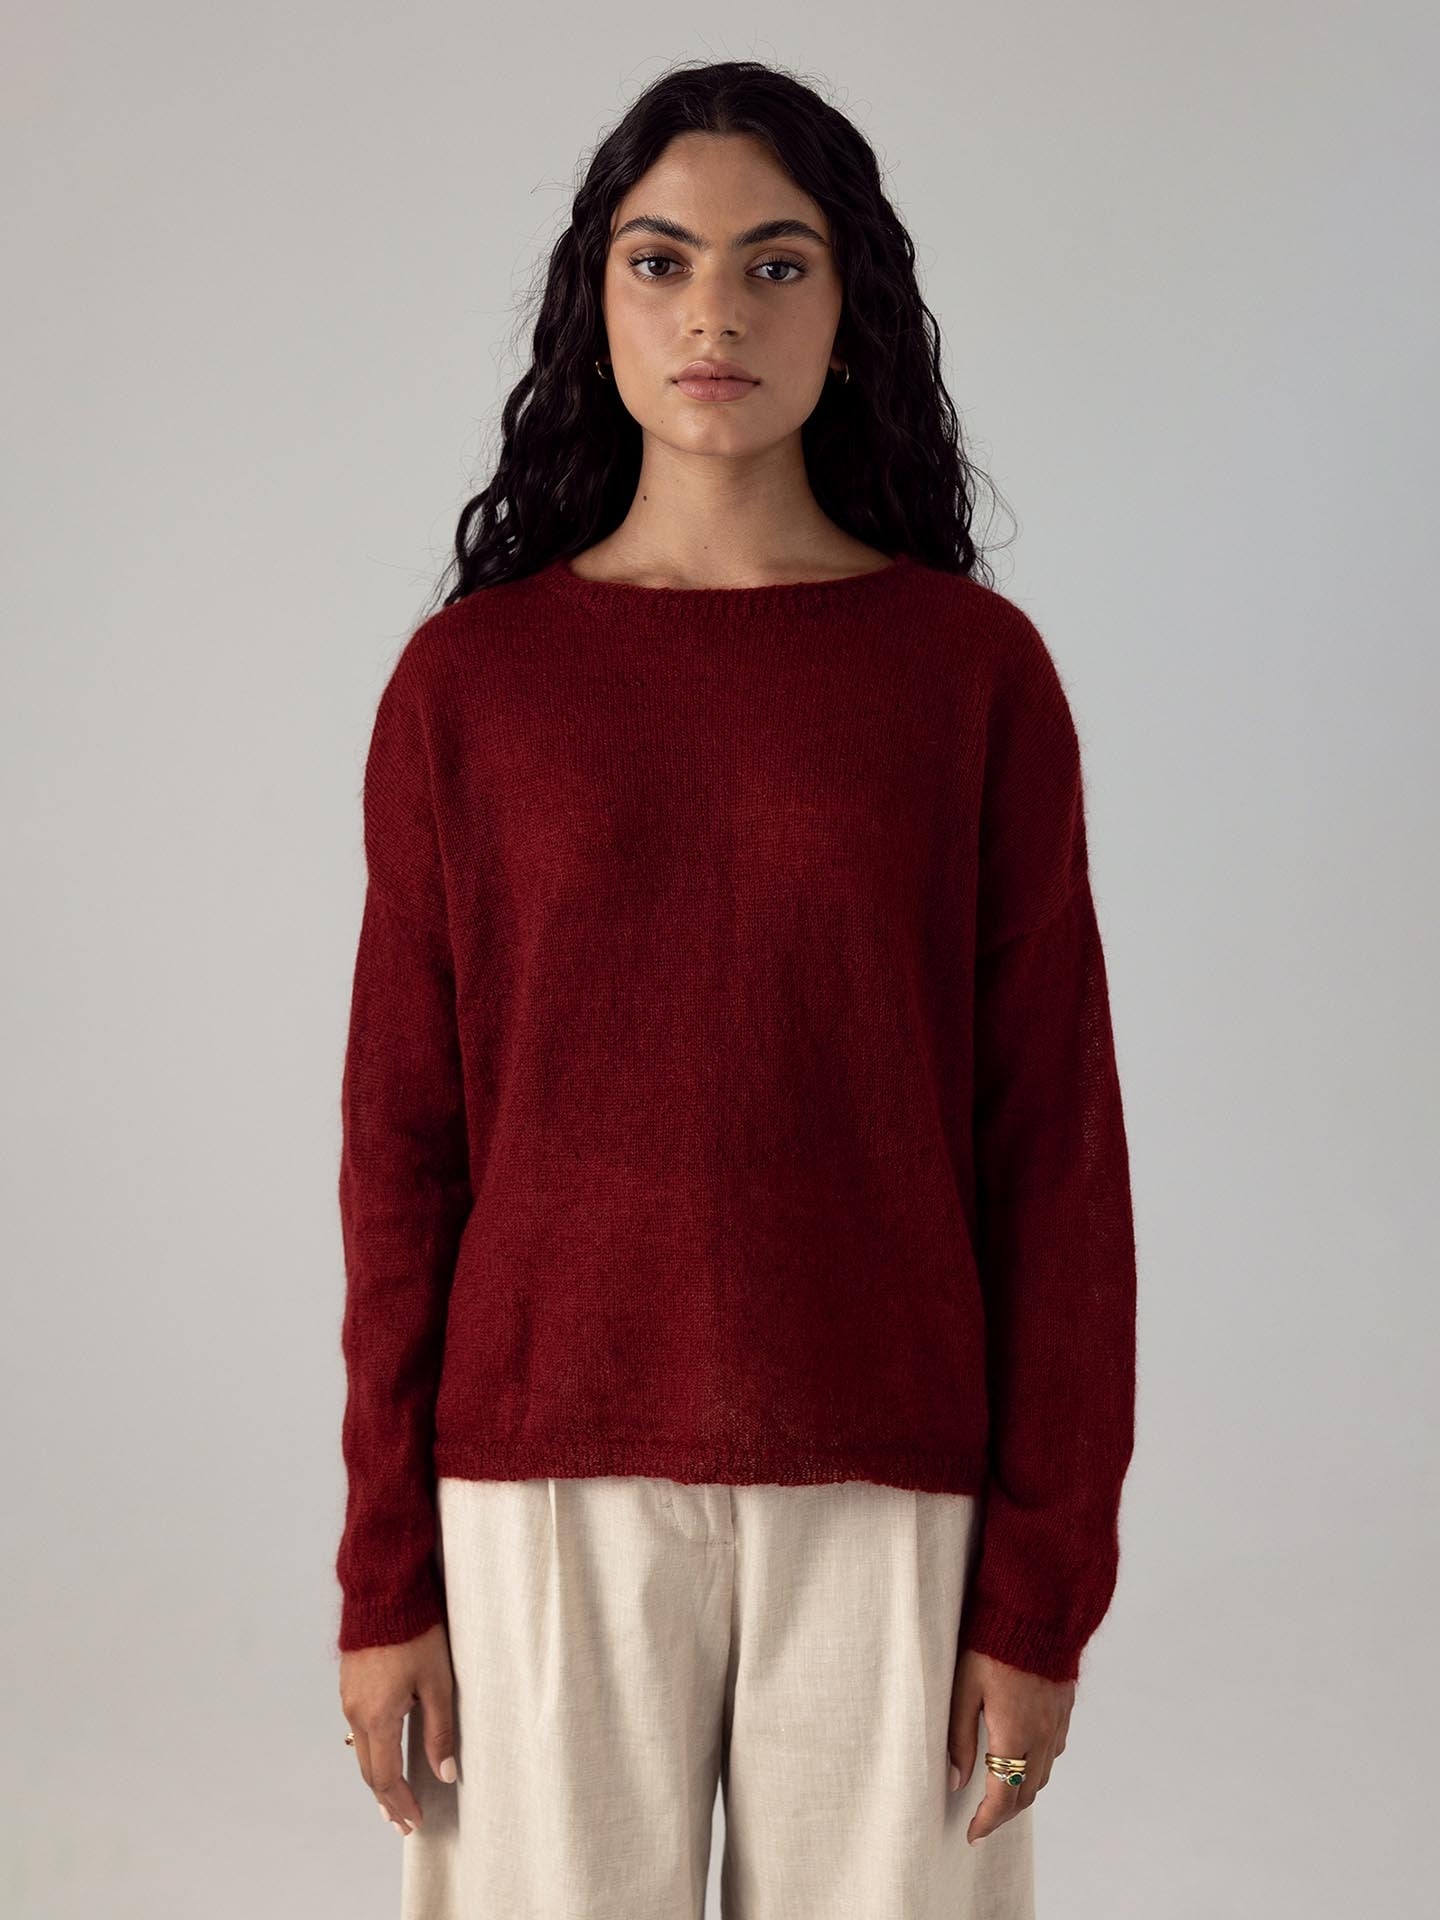 The model is wearing a Francie Feather Knit – Dark Cherry sweater and beige pants.